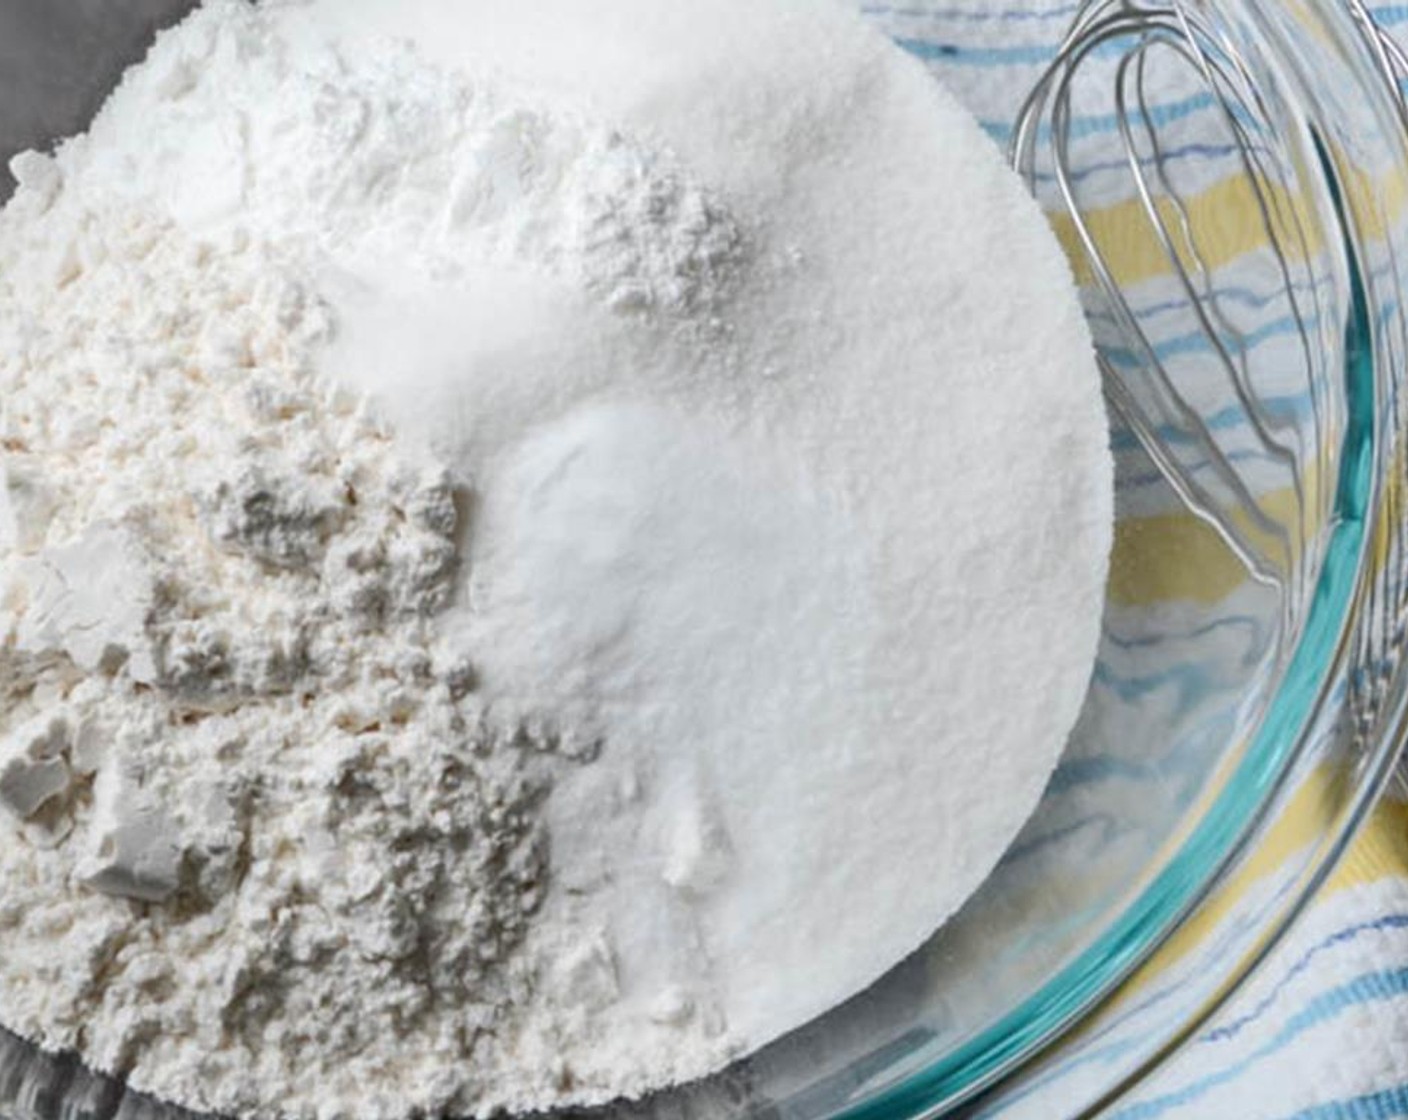 step 2 Add sifted All-Purpose Flour (3 cups), Granulated Sugar (1 cup), Baking Powder (1 Tbsp)  Baking Powder (1 tsp), and Salt (1 tsp) to a large bowl and whisk together. Set aside.